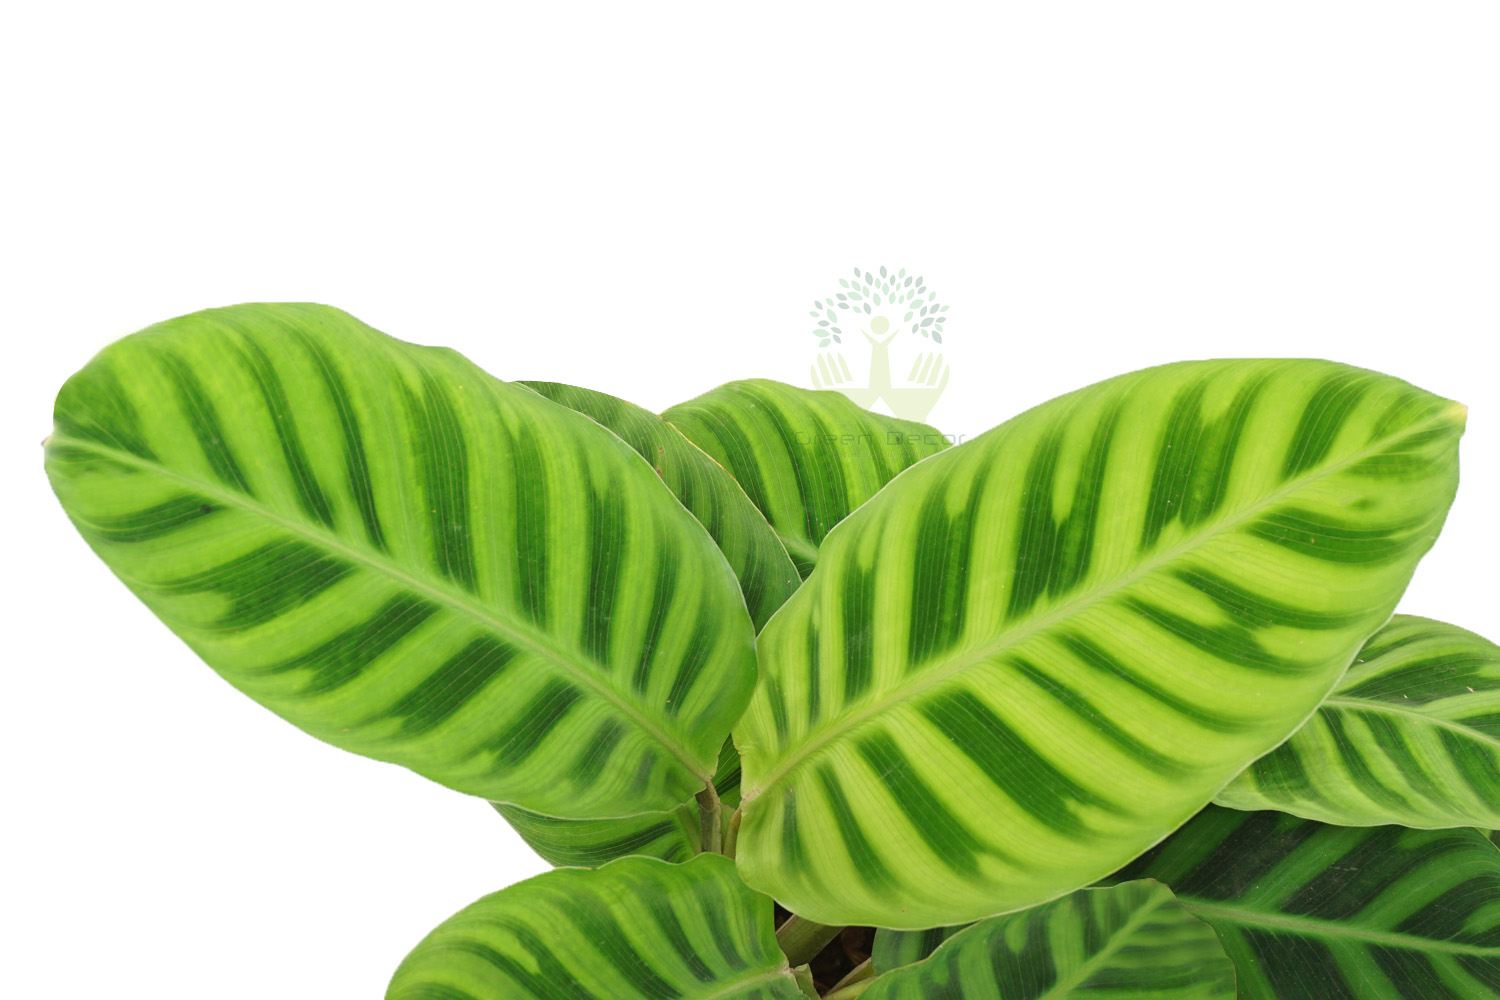 Buy Zebra Plant Leaves View, White Pots and Seeds in Delhi NCR by the best online nursery shop Greendecor.